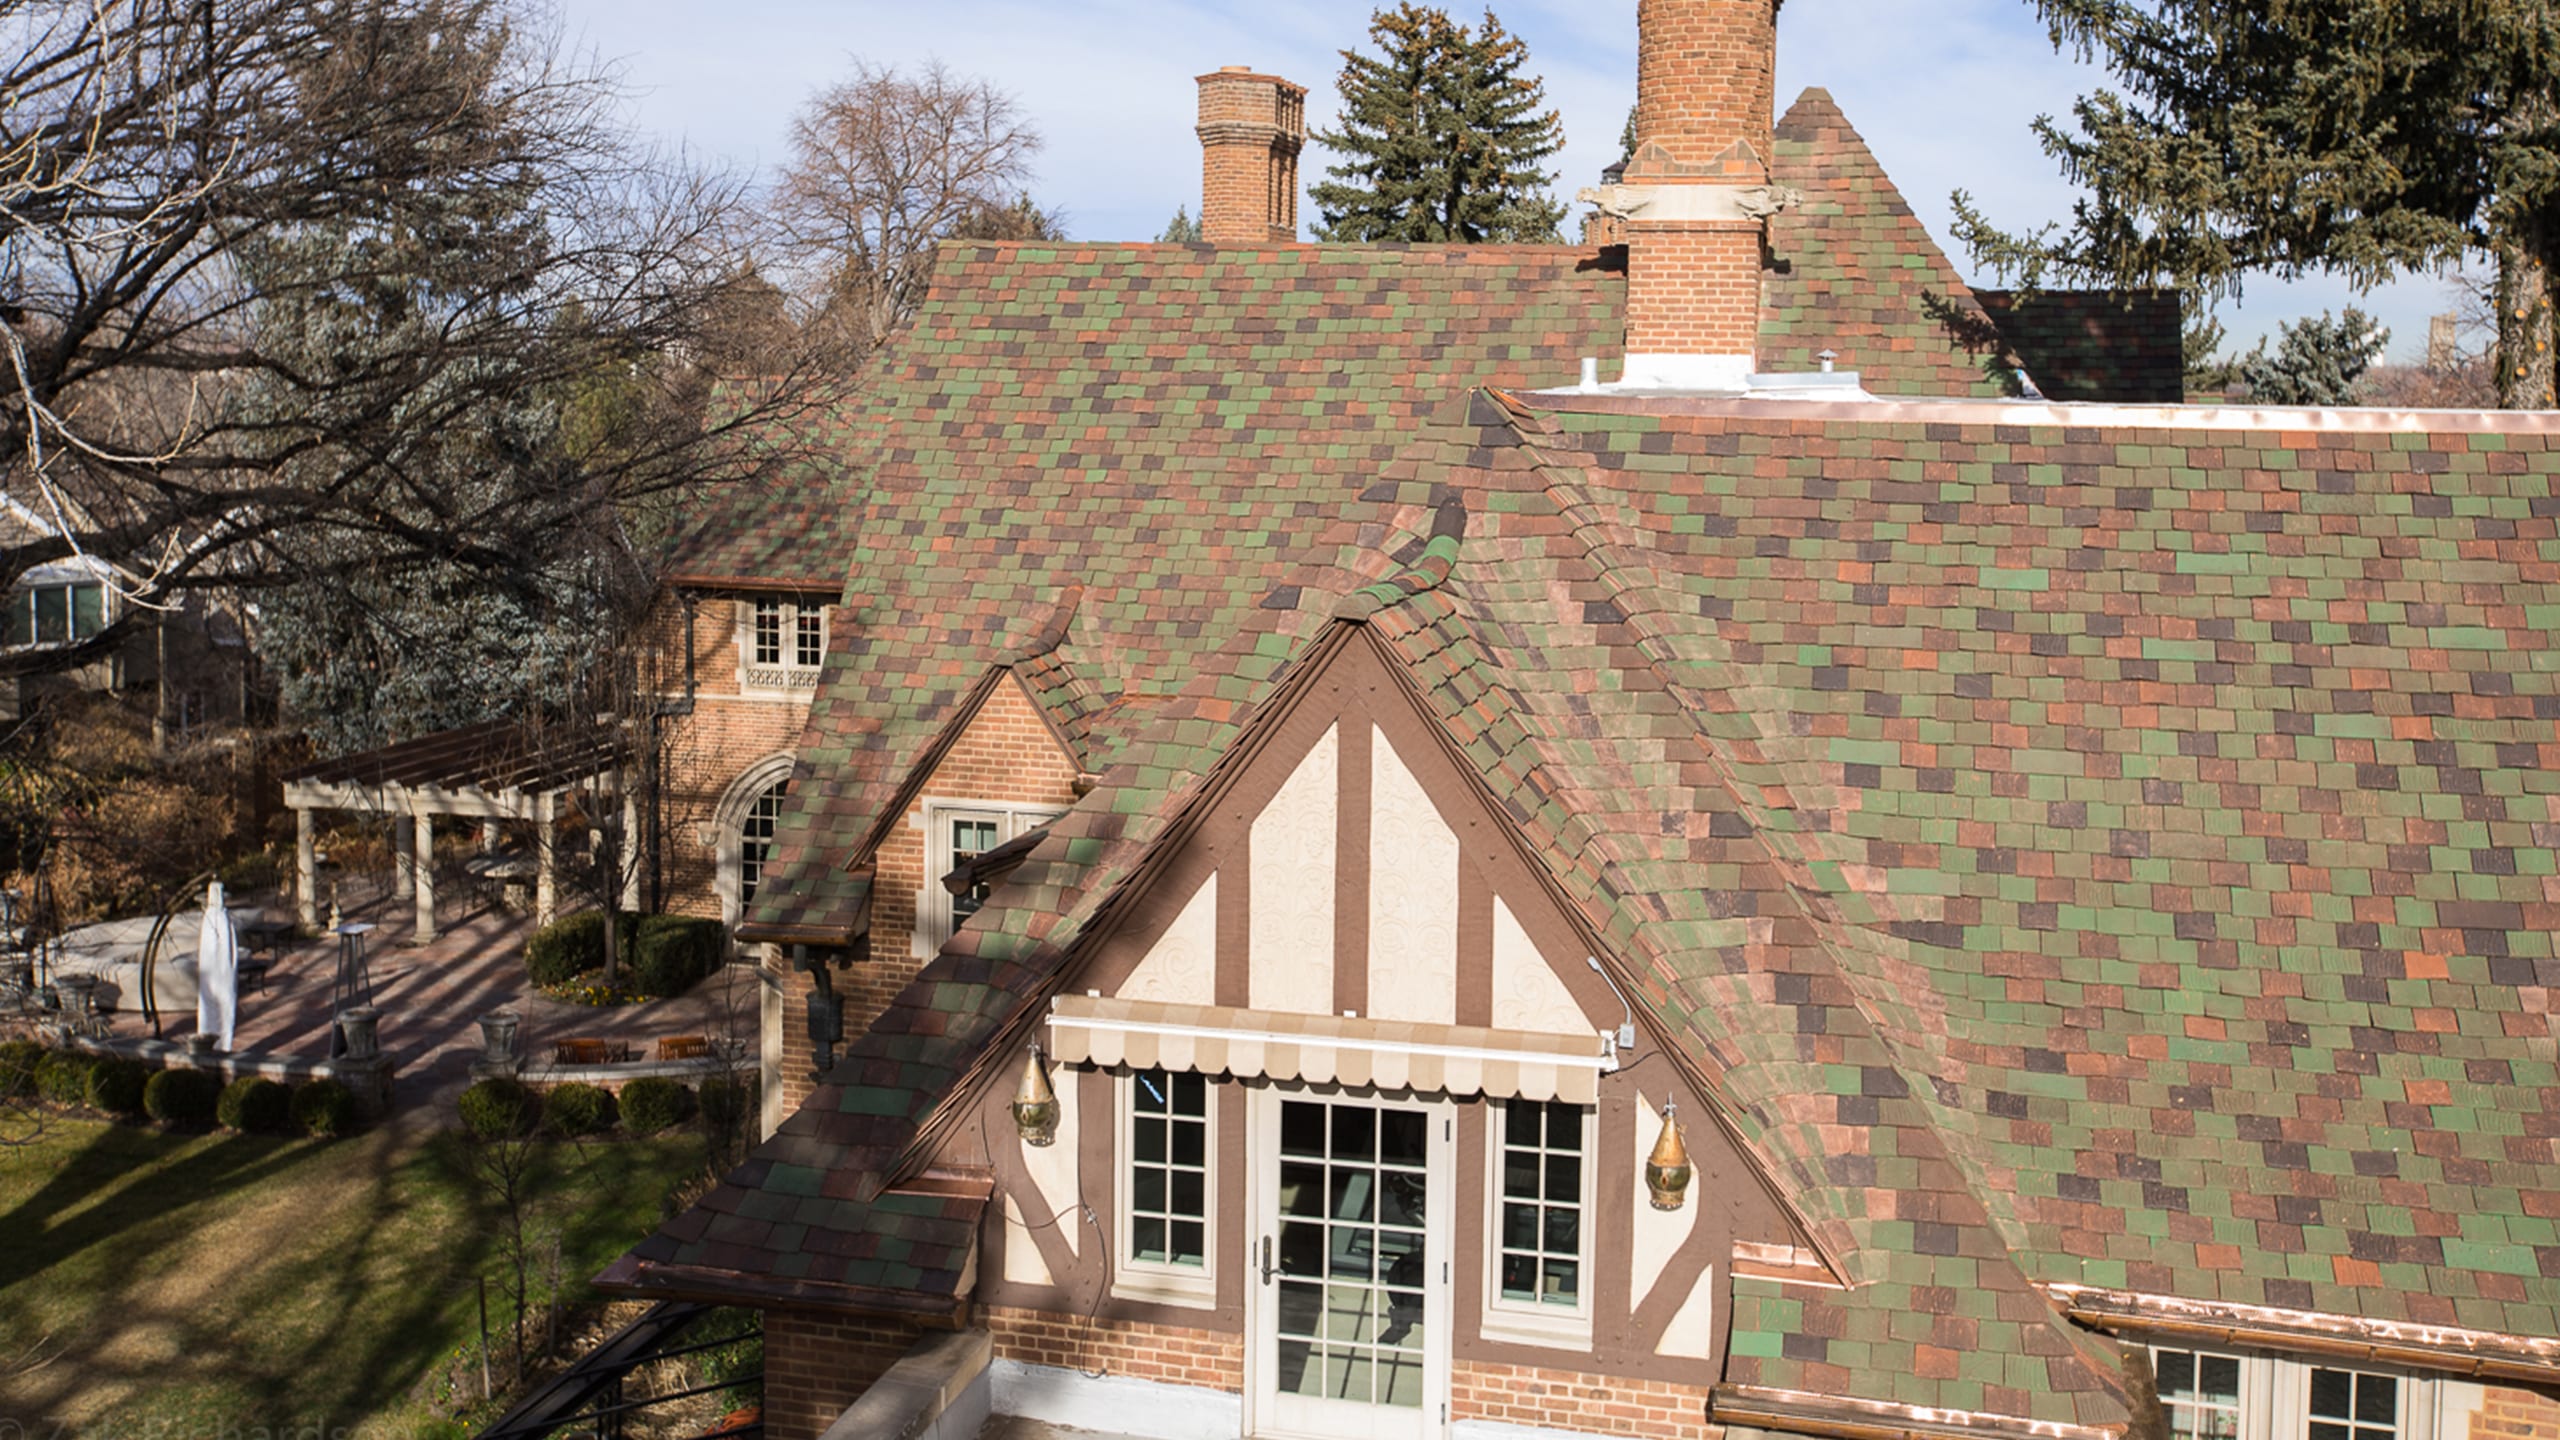 Private Residence in Denver, CO featuring Ludowici terra cotta roof tile.